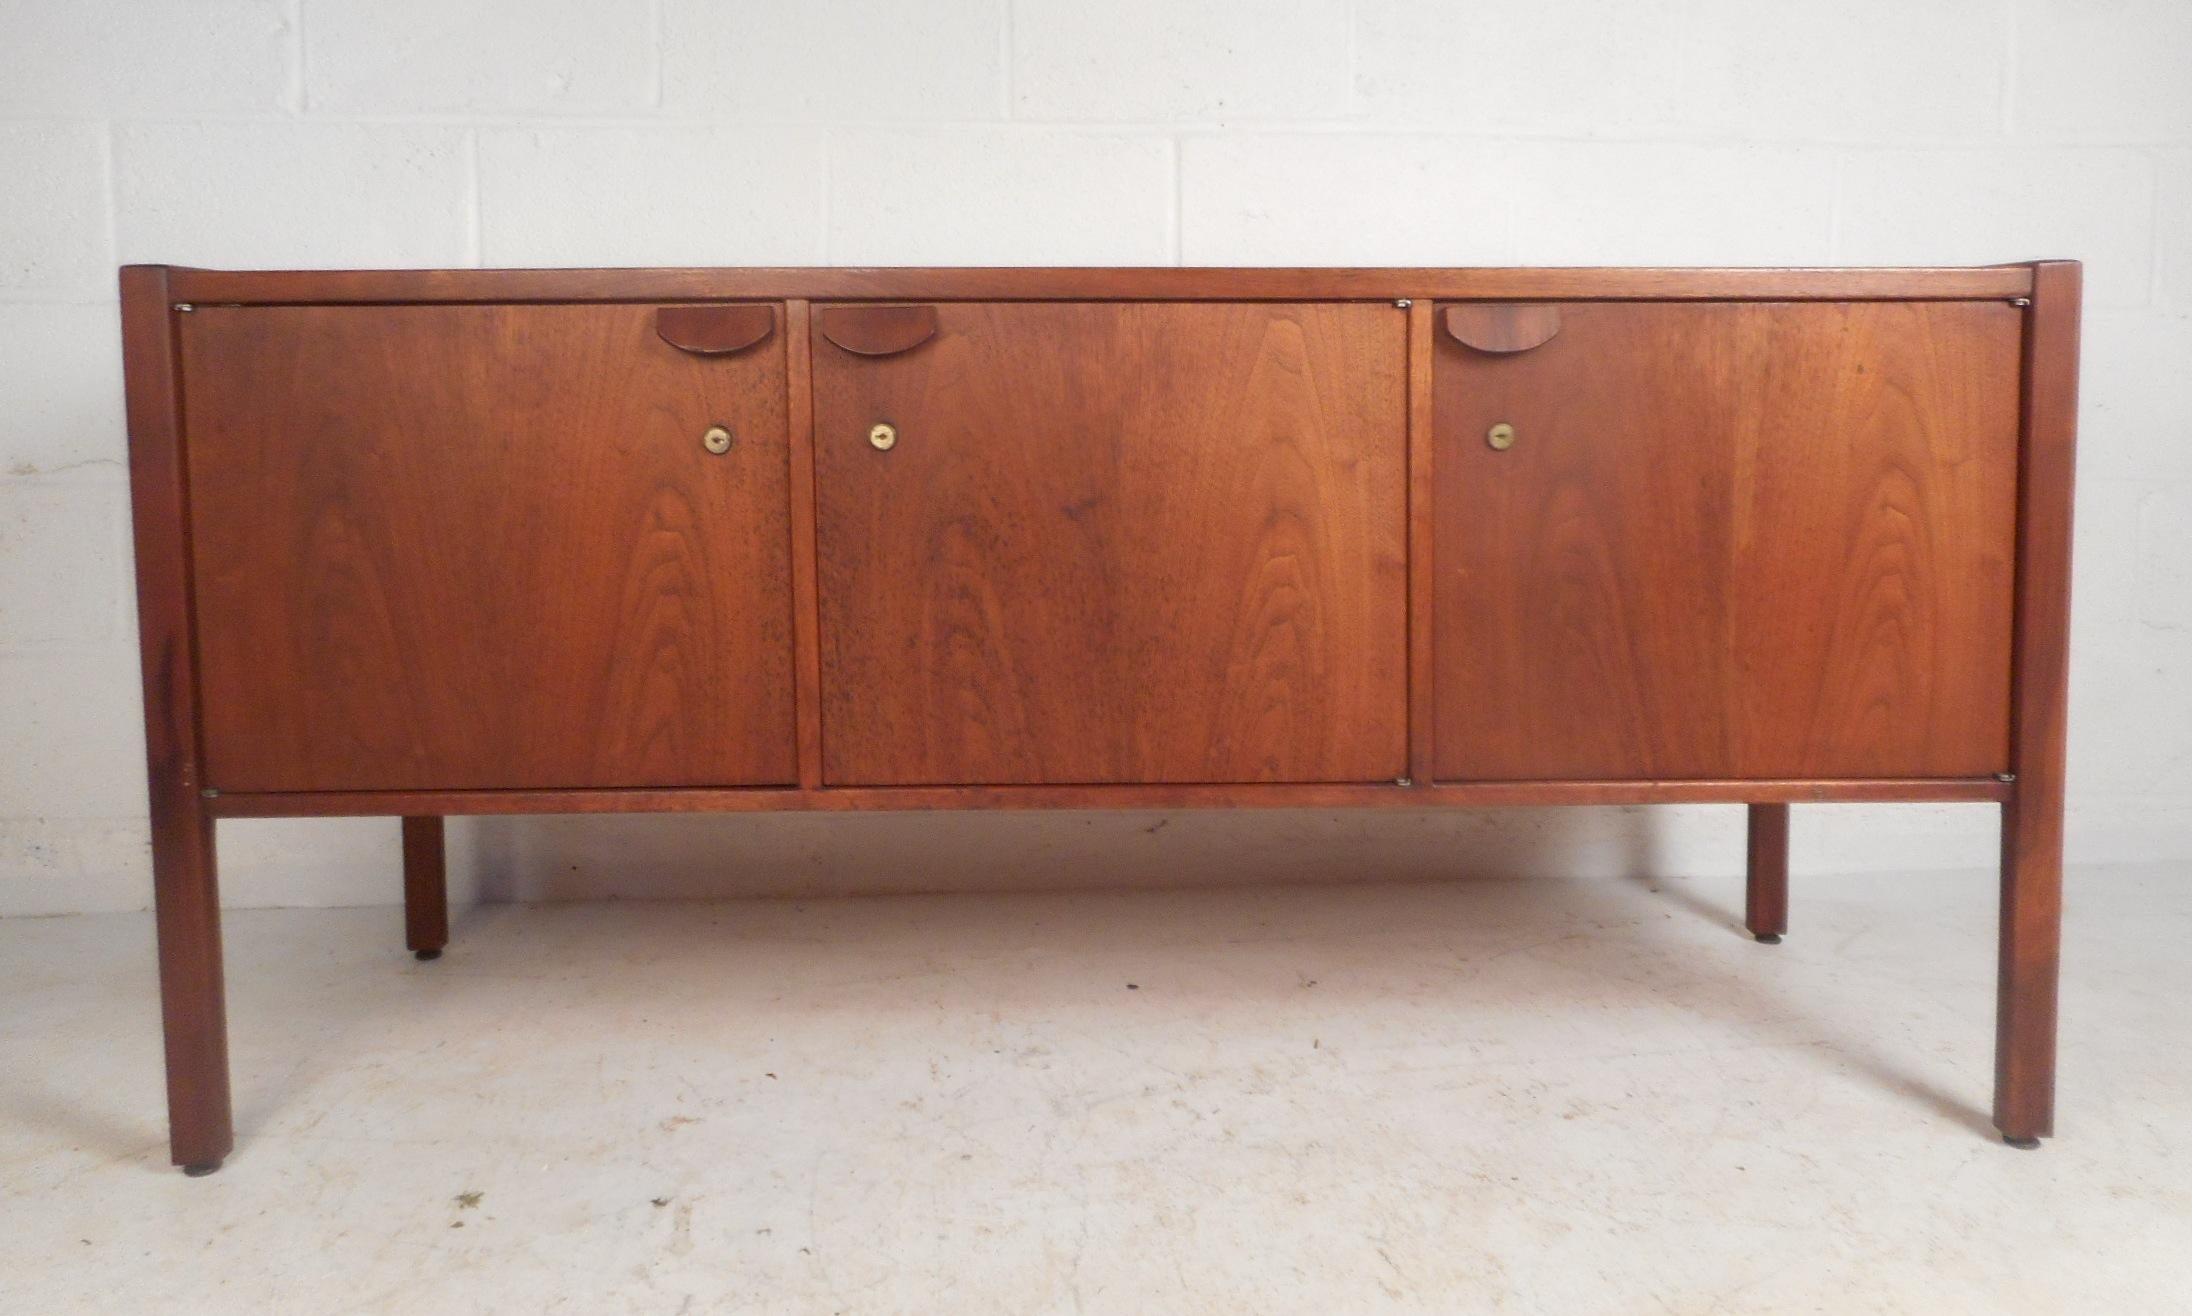 A beautiful vintage modern dark walnut buffet with three cabinet doors hiding an abundance of storage space. A sleek design by Jens Risom with straight lines, sculpted pulls, and elegant walnut wood grain throughout. A handsome midcentury case piece